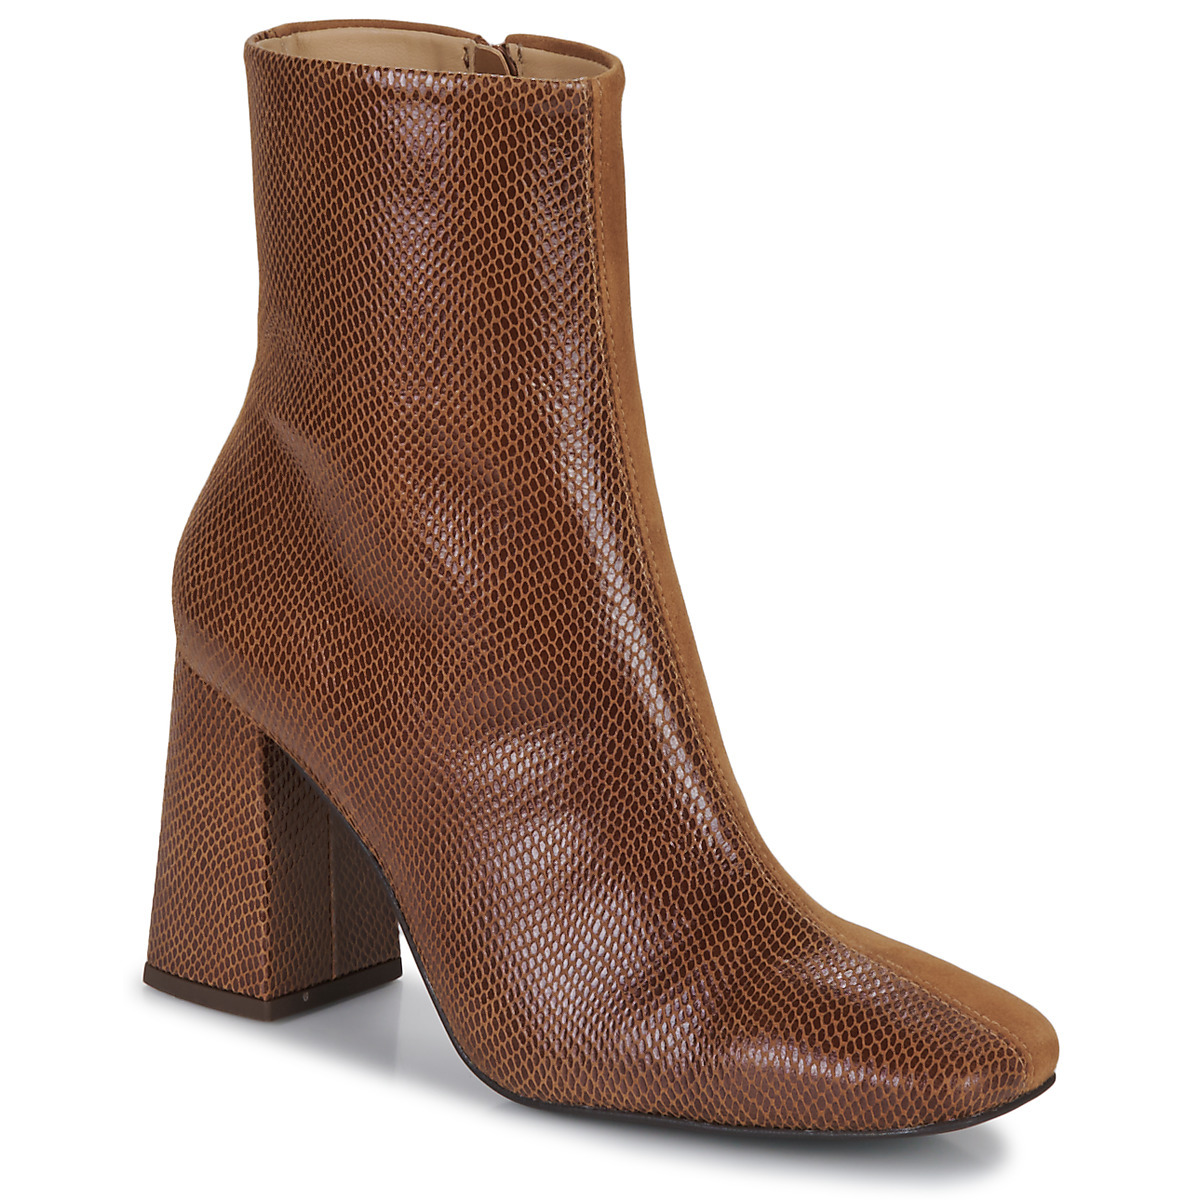 Ankle Boots in Brown for Women from Spartoo GOOFASH